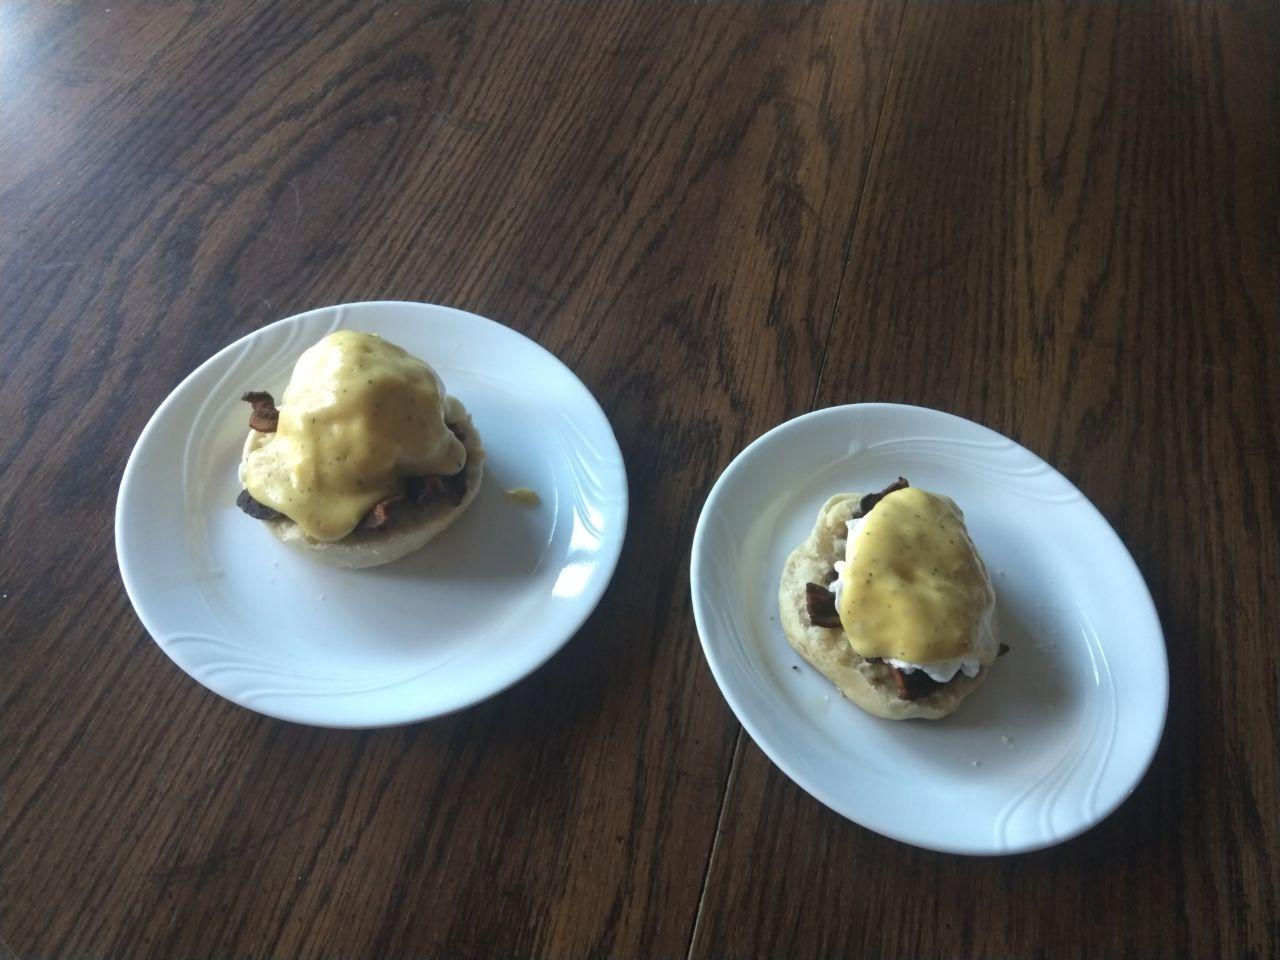 Eggs benedict with a split english muffin, bacon, poached egg, and hollandaise.